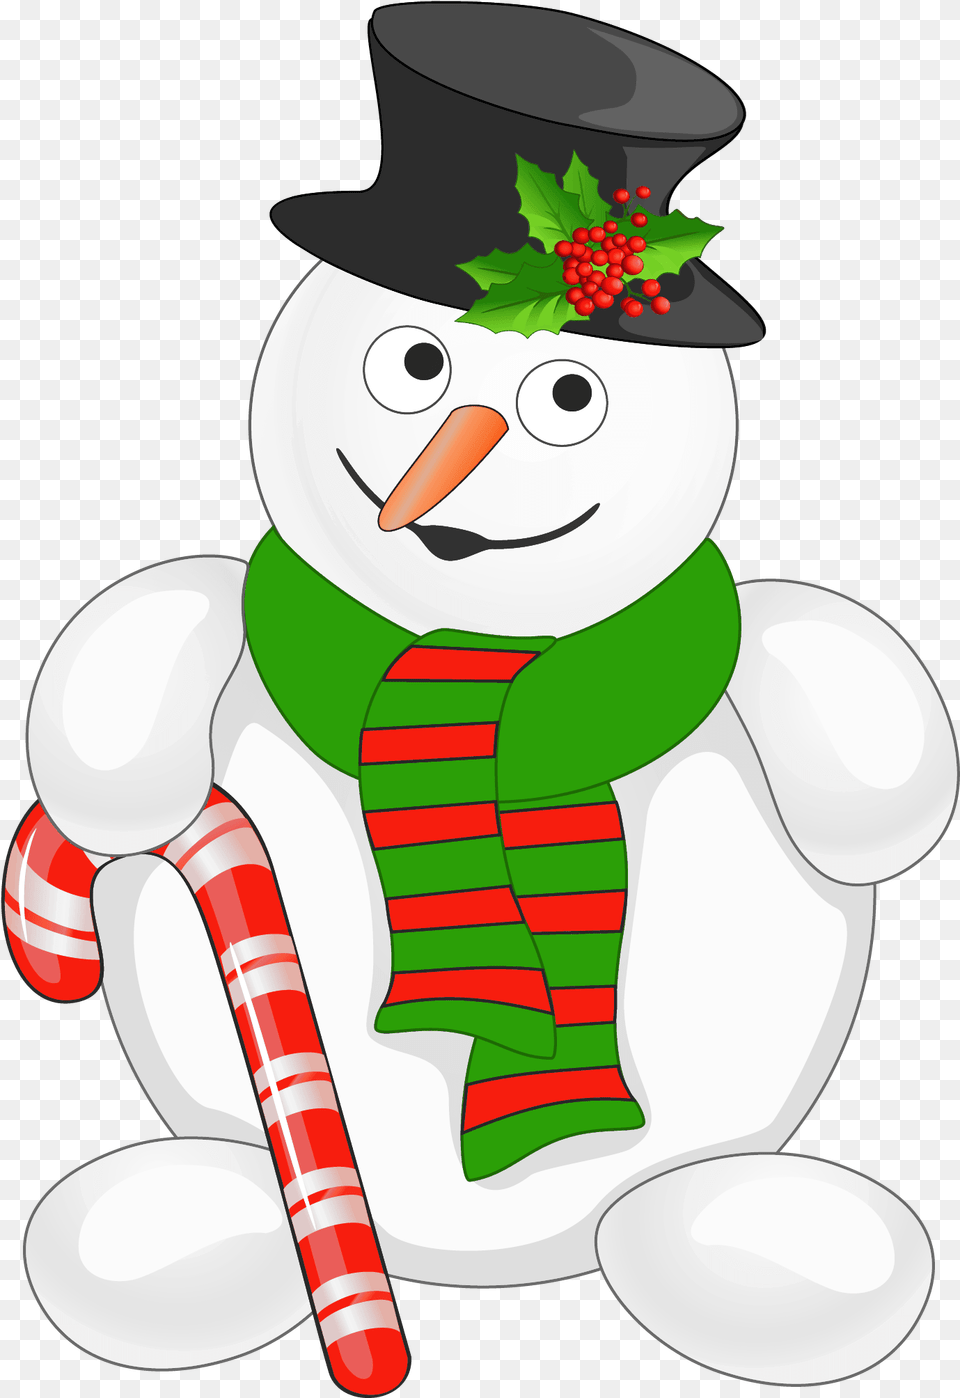 Cute Christmas Snowman Clipart Snowman With Candy Cane, Nature, Outdoors, Winter, Snow Free Transparent Png